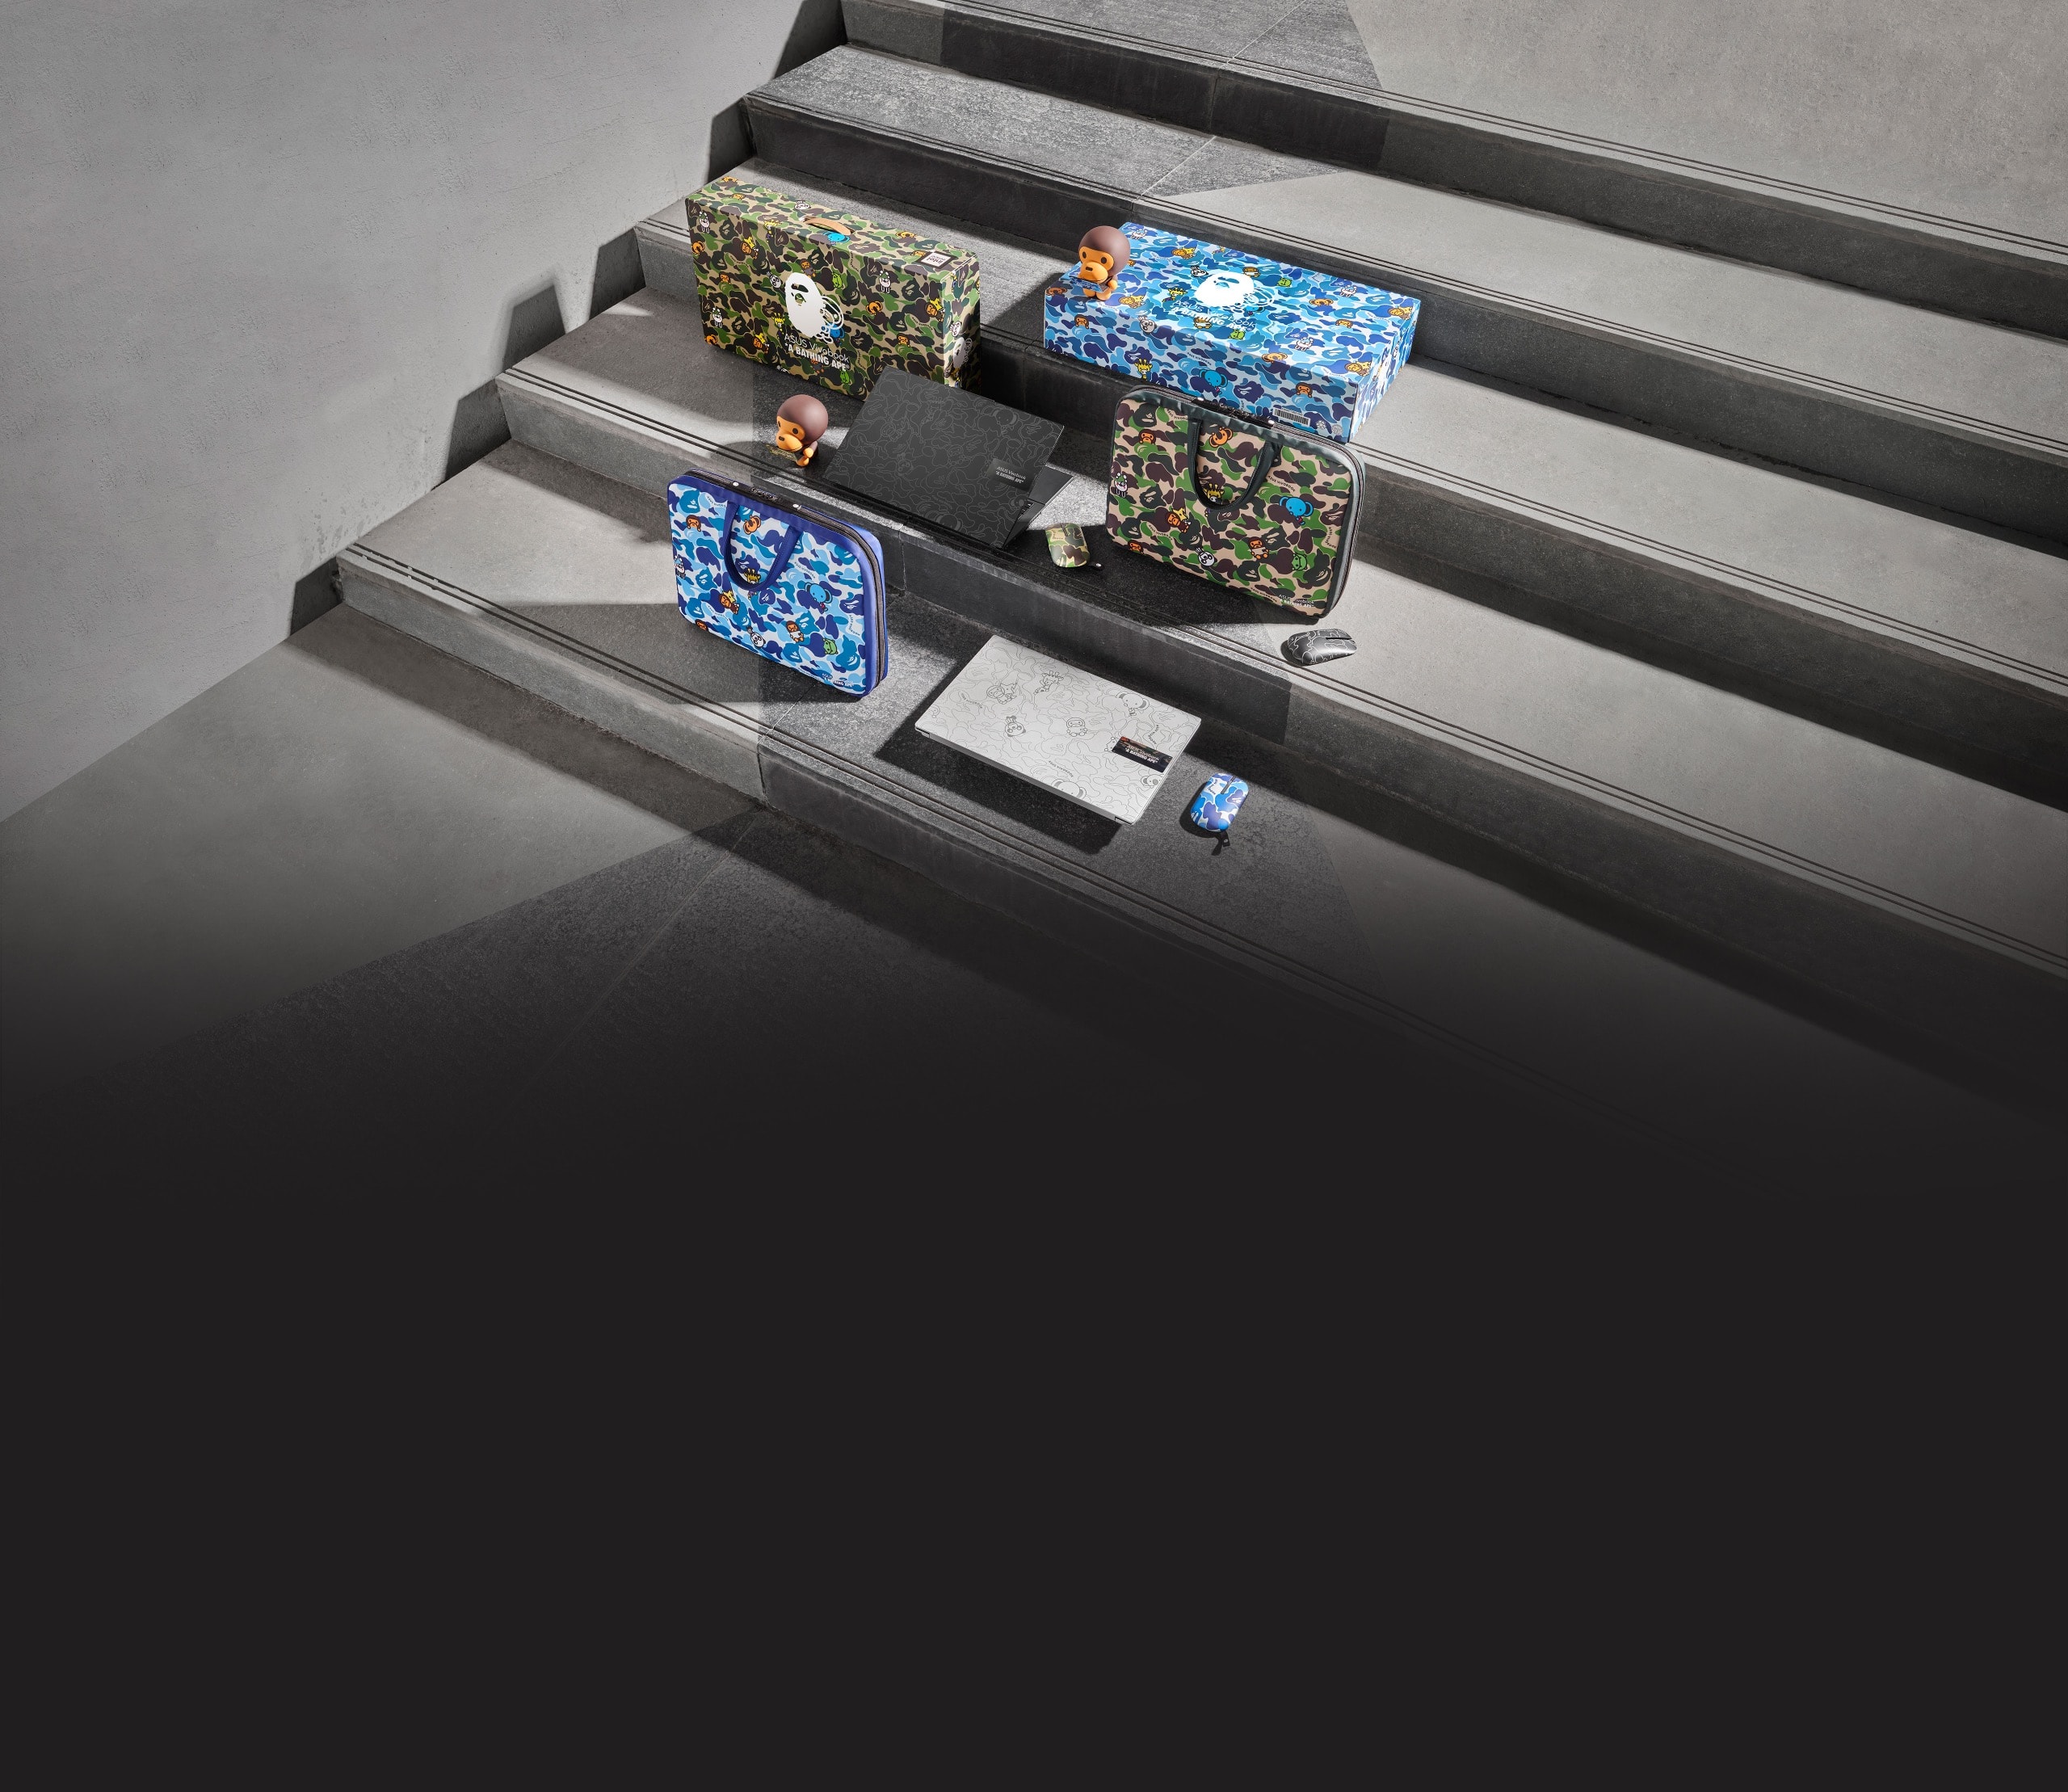 Blue and green Vivobook BAPE Edition bundles are displayed on grey stairs including giftboxs, laptops, mouses and carry bags.